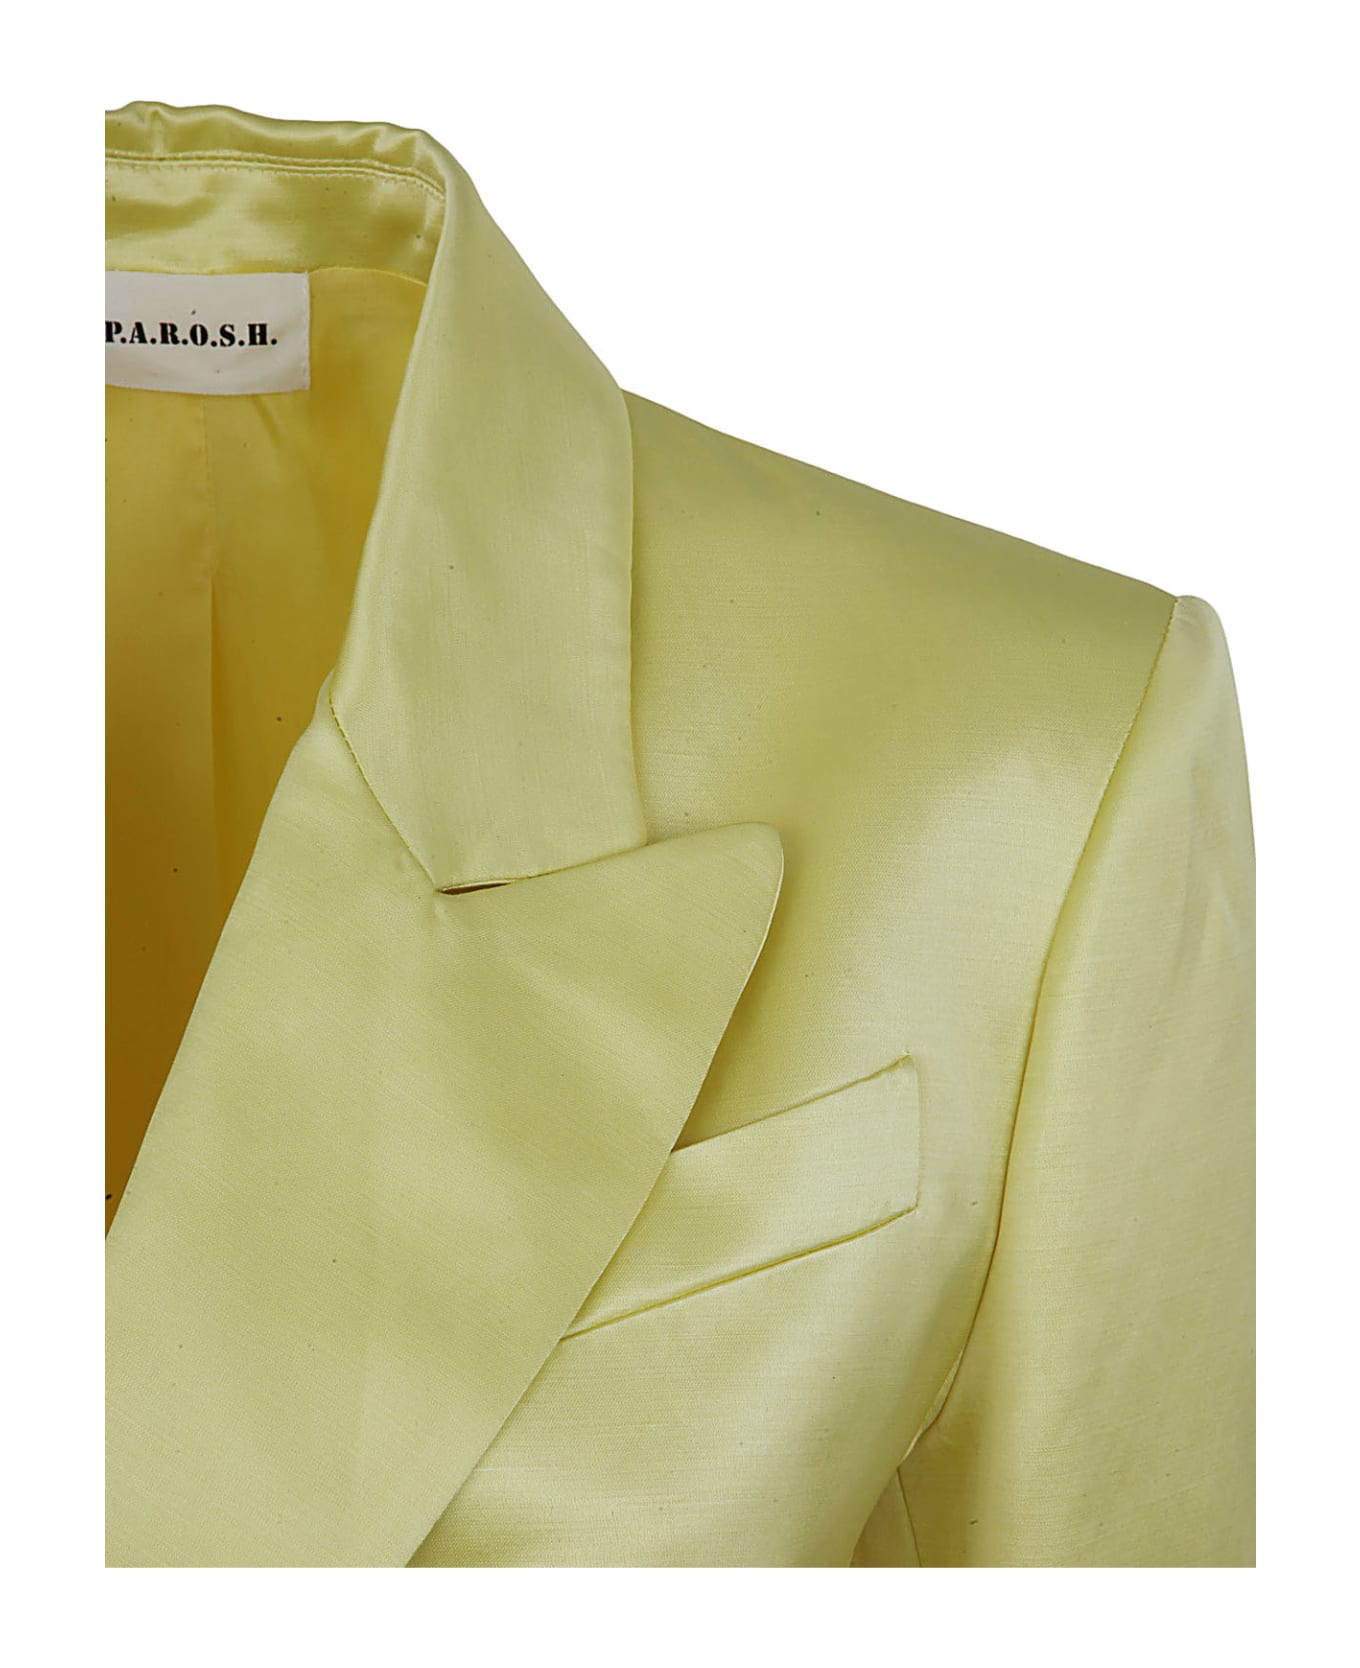 Parosh Double Breasted Satin,viscose And Linen Jacket - Light Yellow